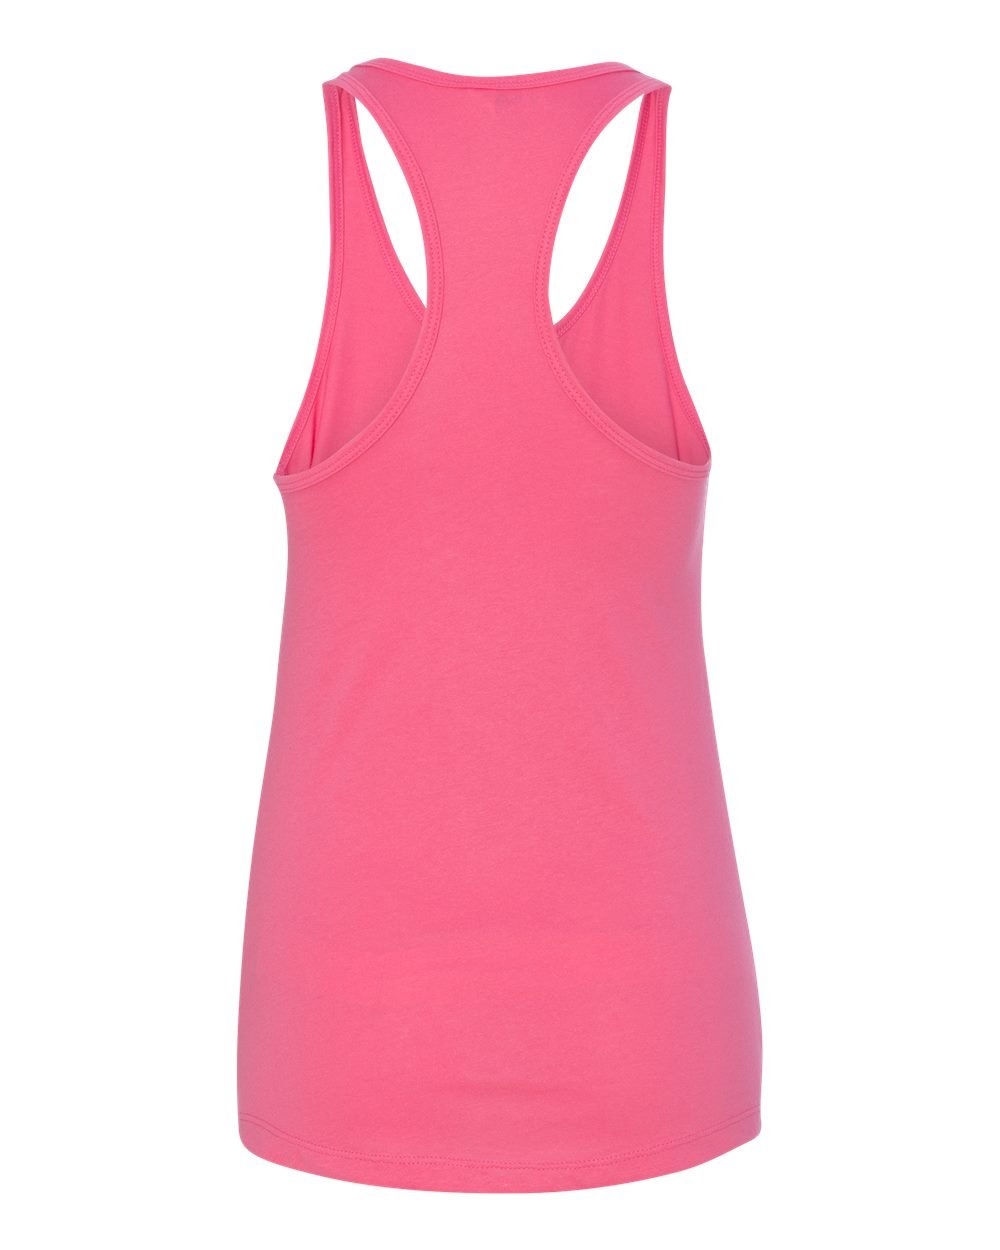 Next Level Ideal Racerback Tank Hot Pink X-Large (Pack of 5)